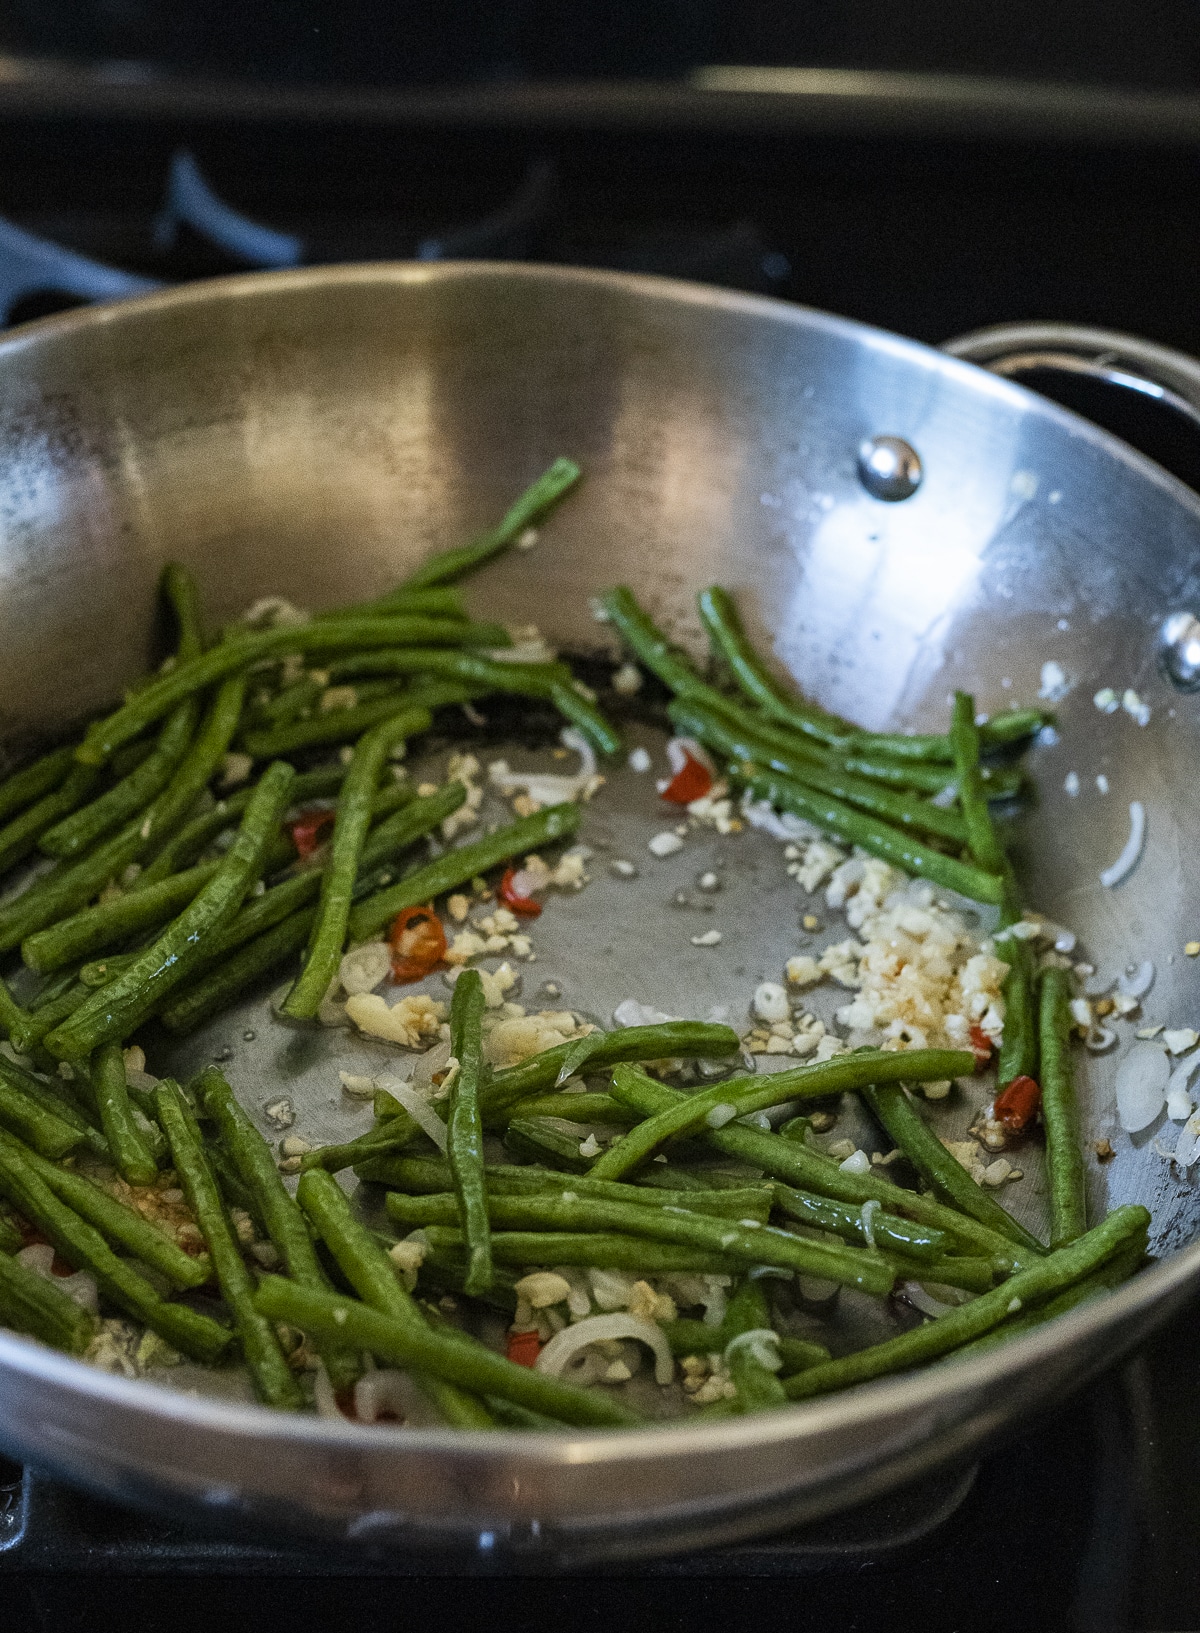 Garlic, shallot, long beans and chilis being sautéed in a wok.